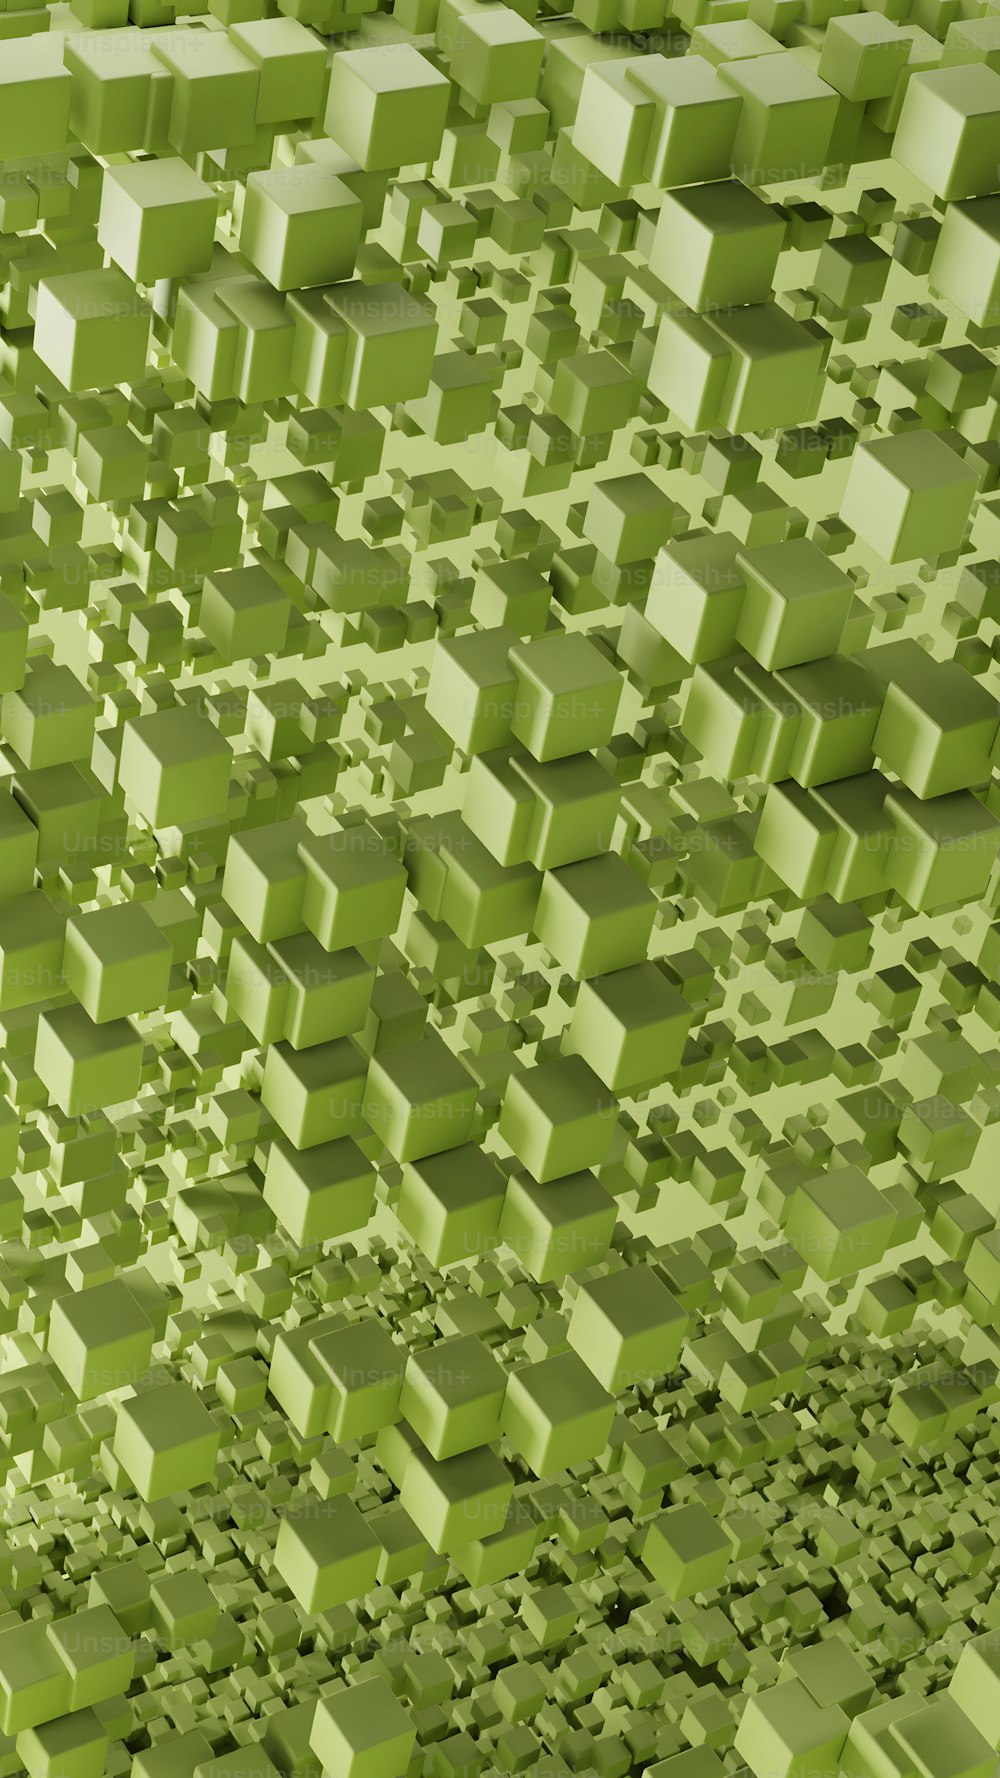 a very large group of cubes that are green